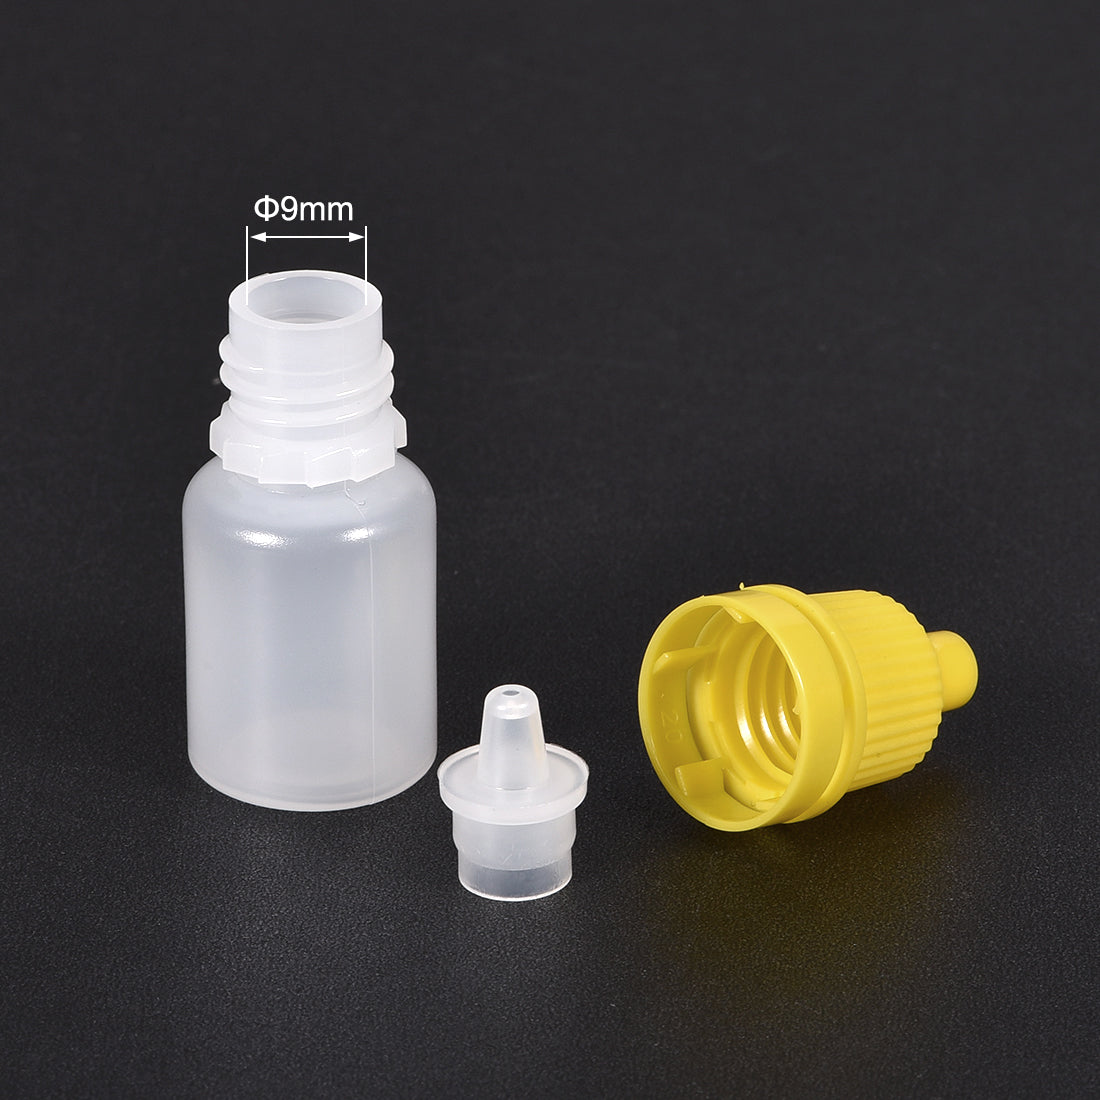 uxcell Uxcell 5ml/0.17 oz Empty Squeezable Dropper Bottle Yellow 50pcs